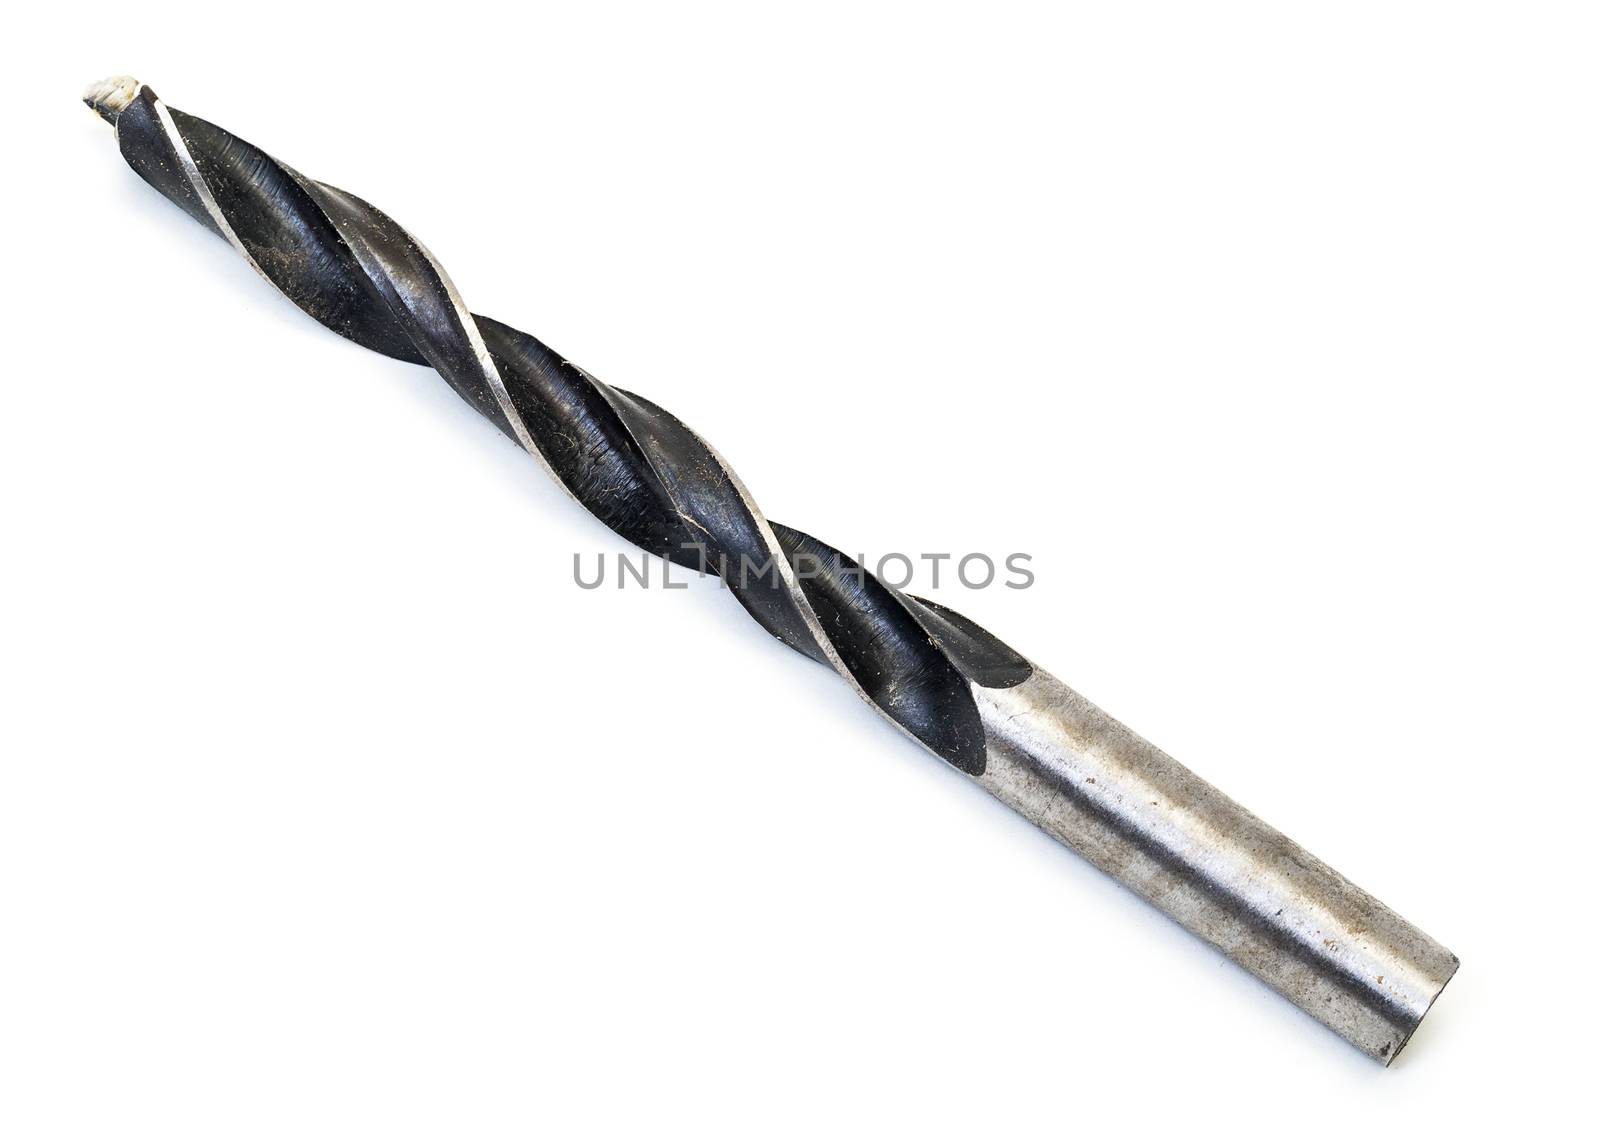 One Drill Bit by Discovod